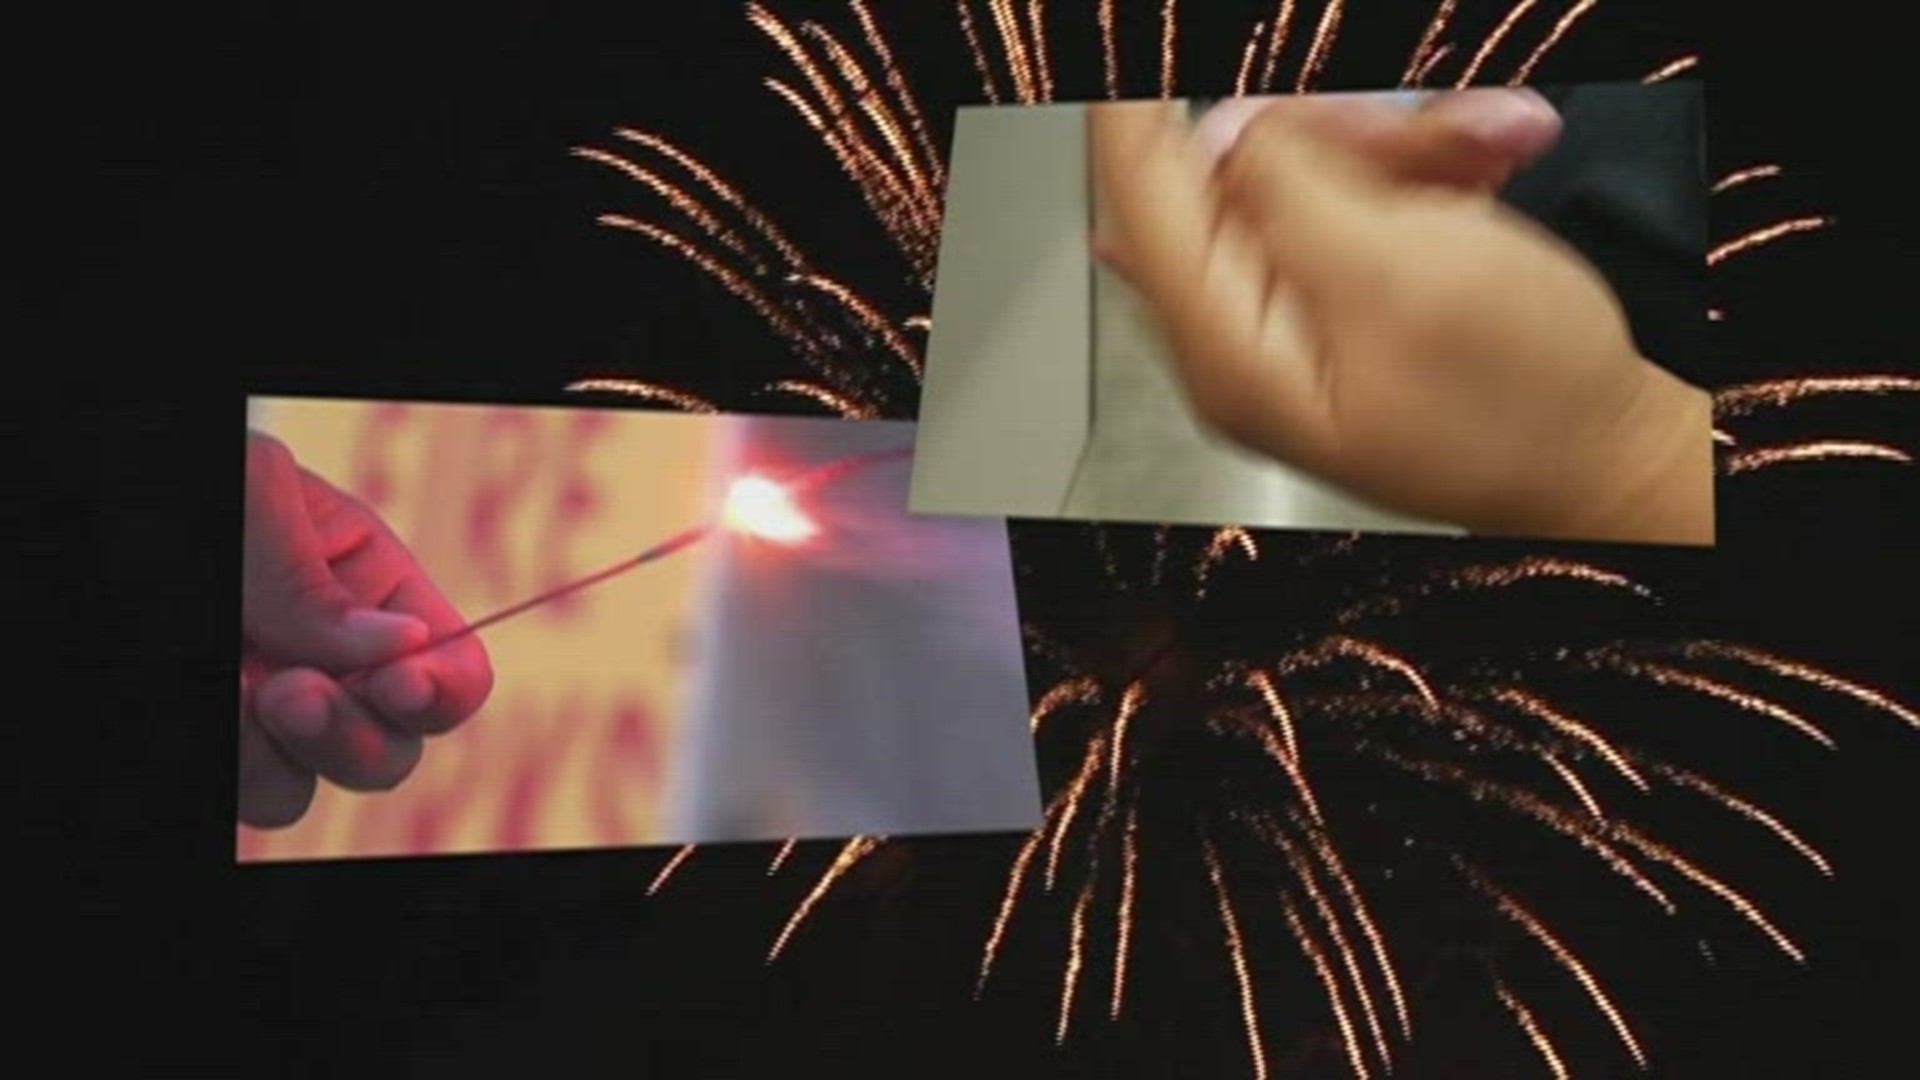 Medical professionals say lighting fireworks after hand sanitizer use could lead to injuries.